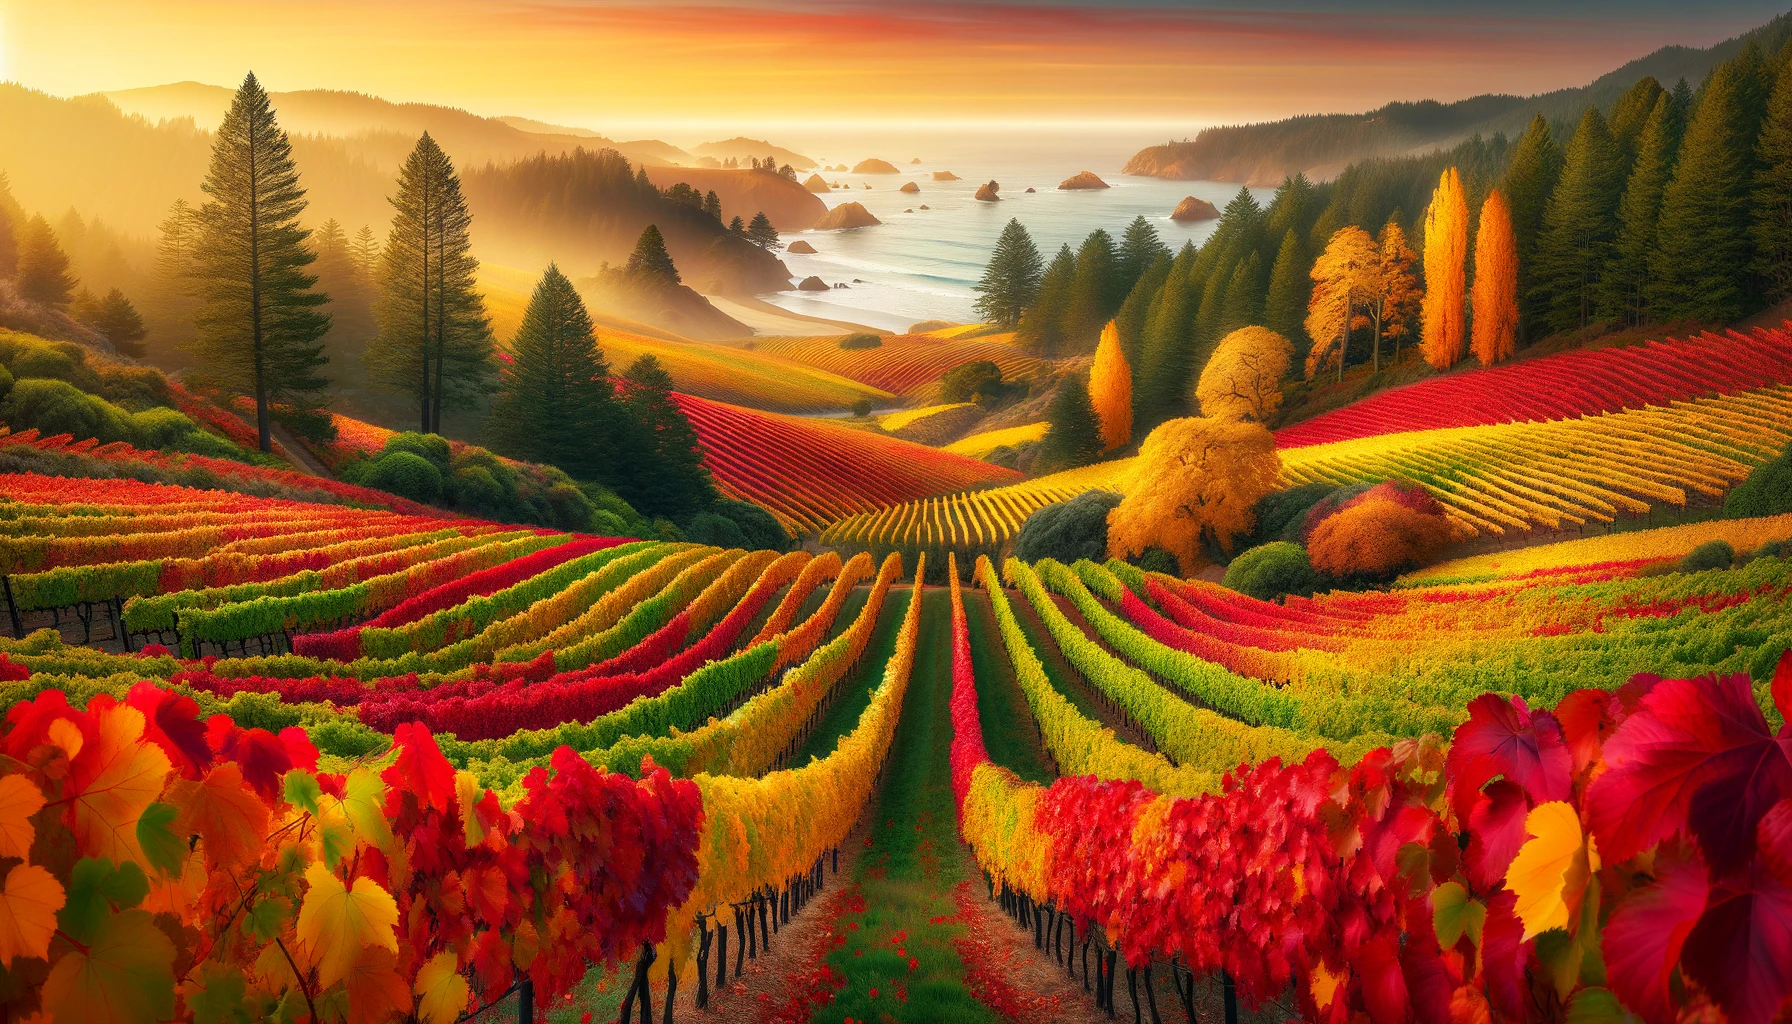 A panoramic view of a vibrant vineyard in early November, capturing leaves in the rasta hues of reds, greens, and golds, extending towards the Pacific Ocean